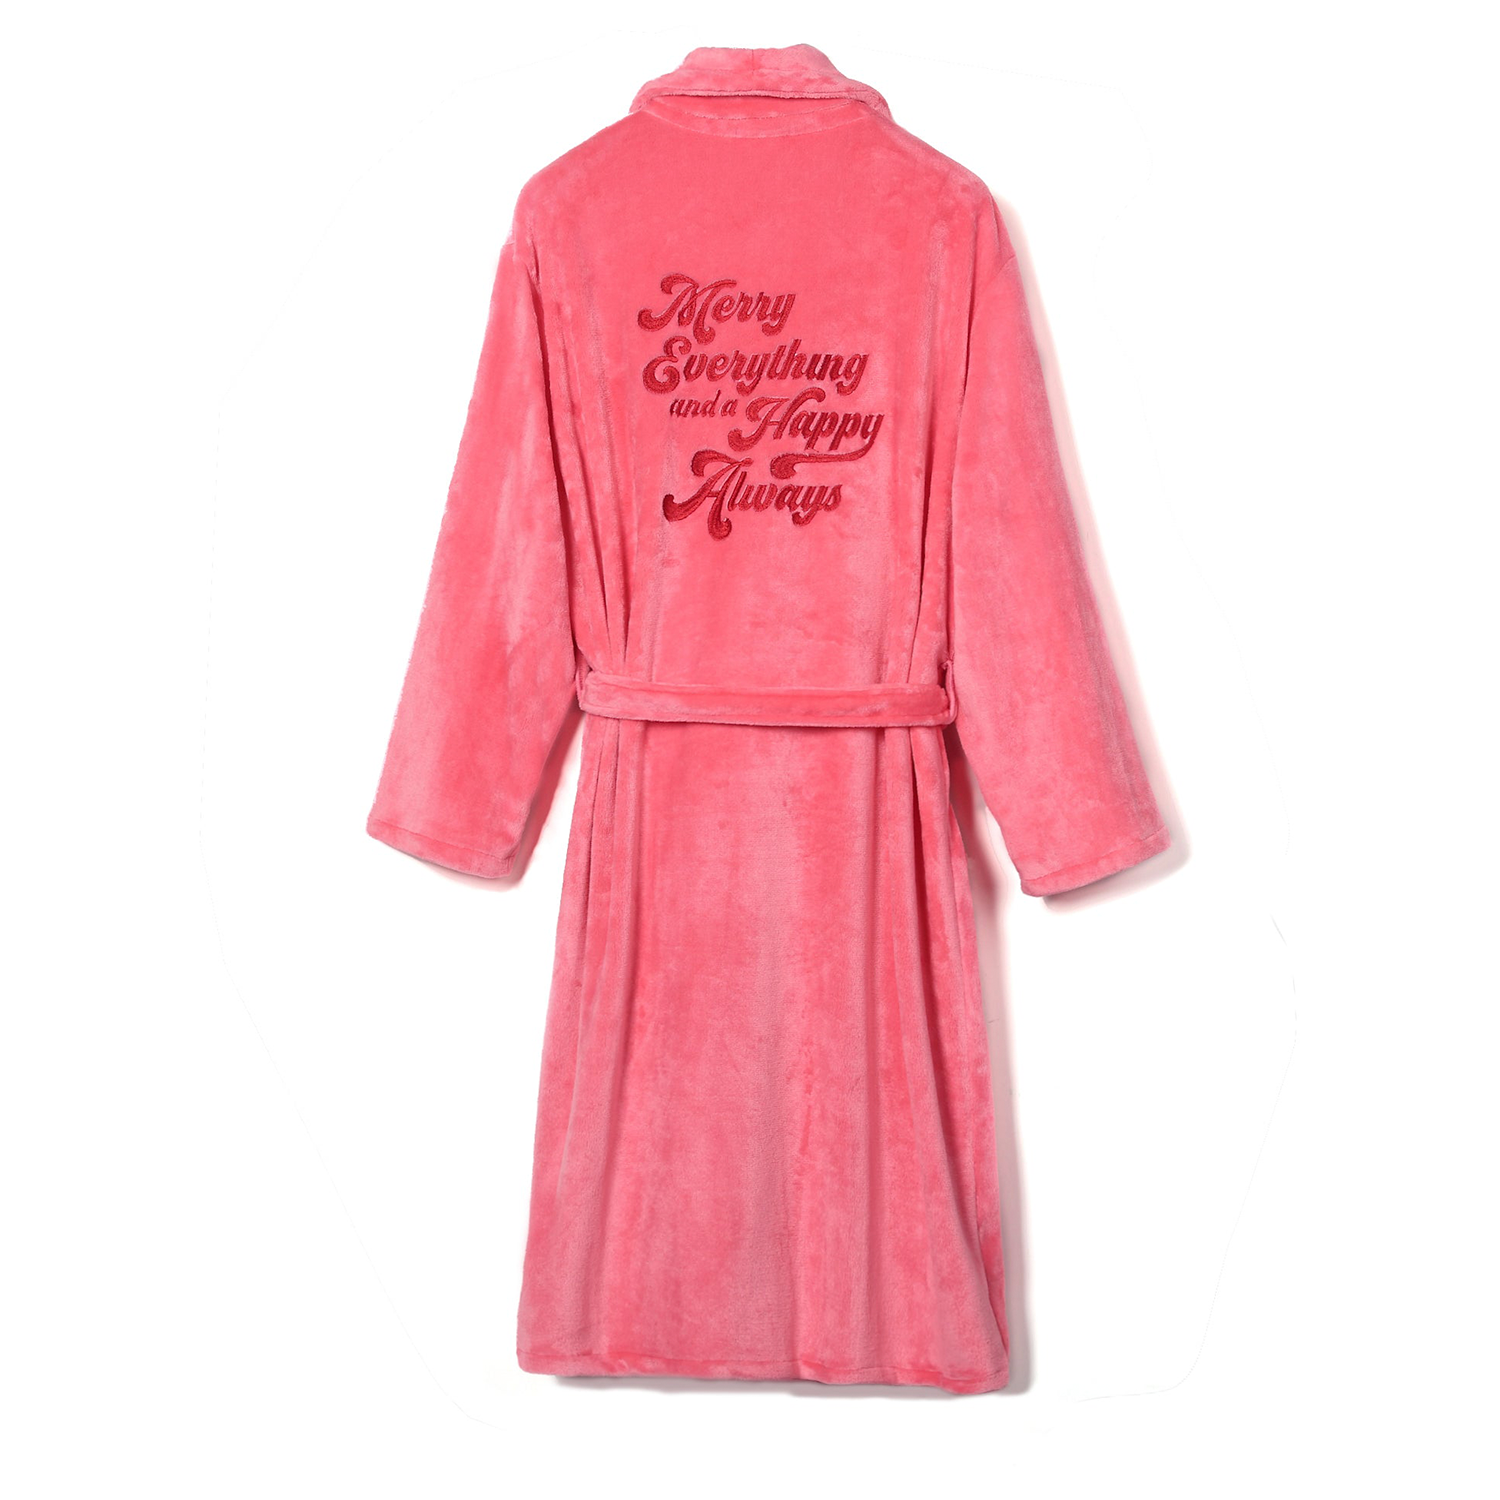 Merry Everything and A Happy Always Plush Fleece Robe